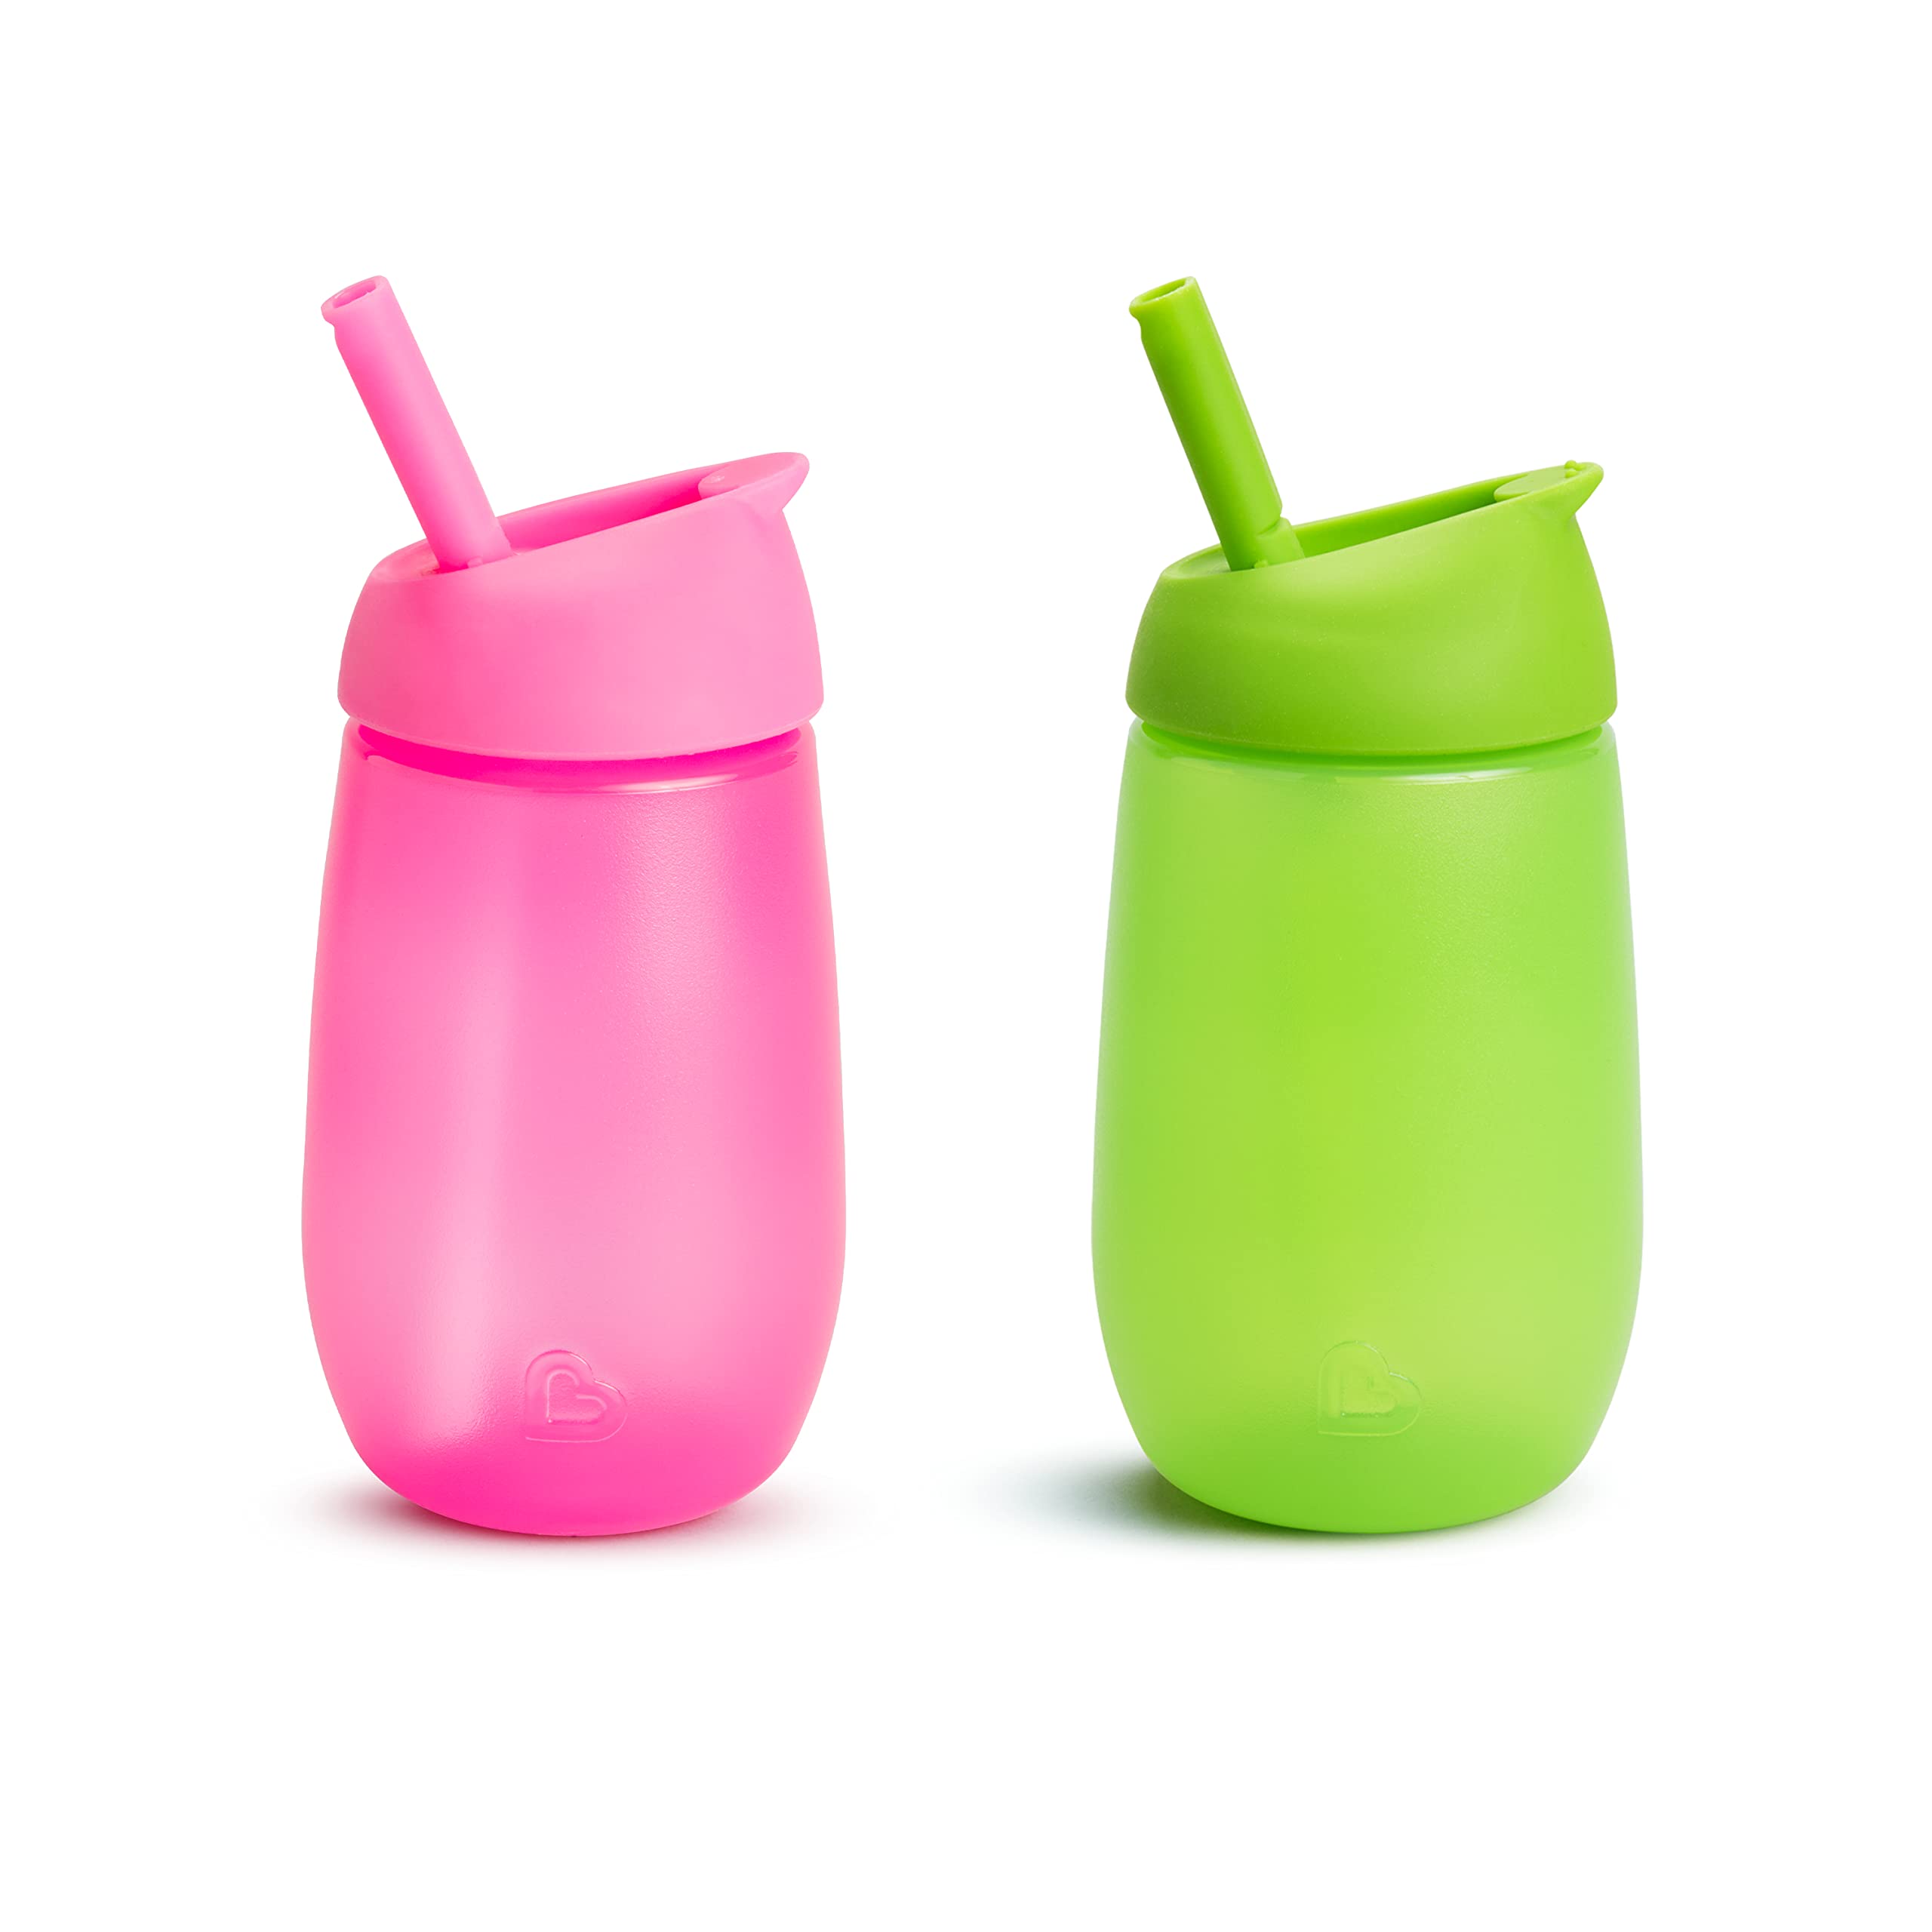 Munchkin Simple Clean Straw Cup, 10oz/296ml, 2 Pack, Green/Pink